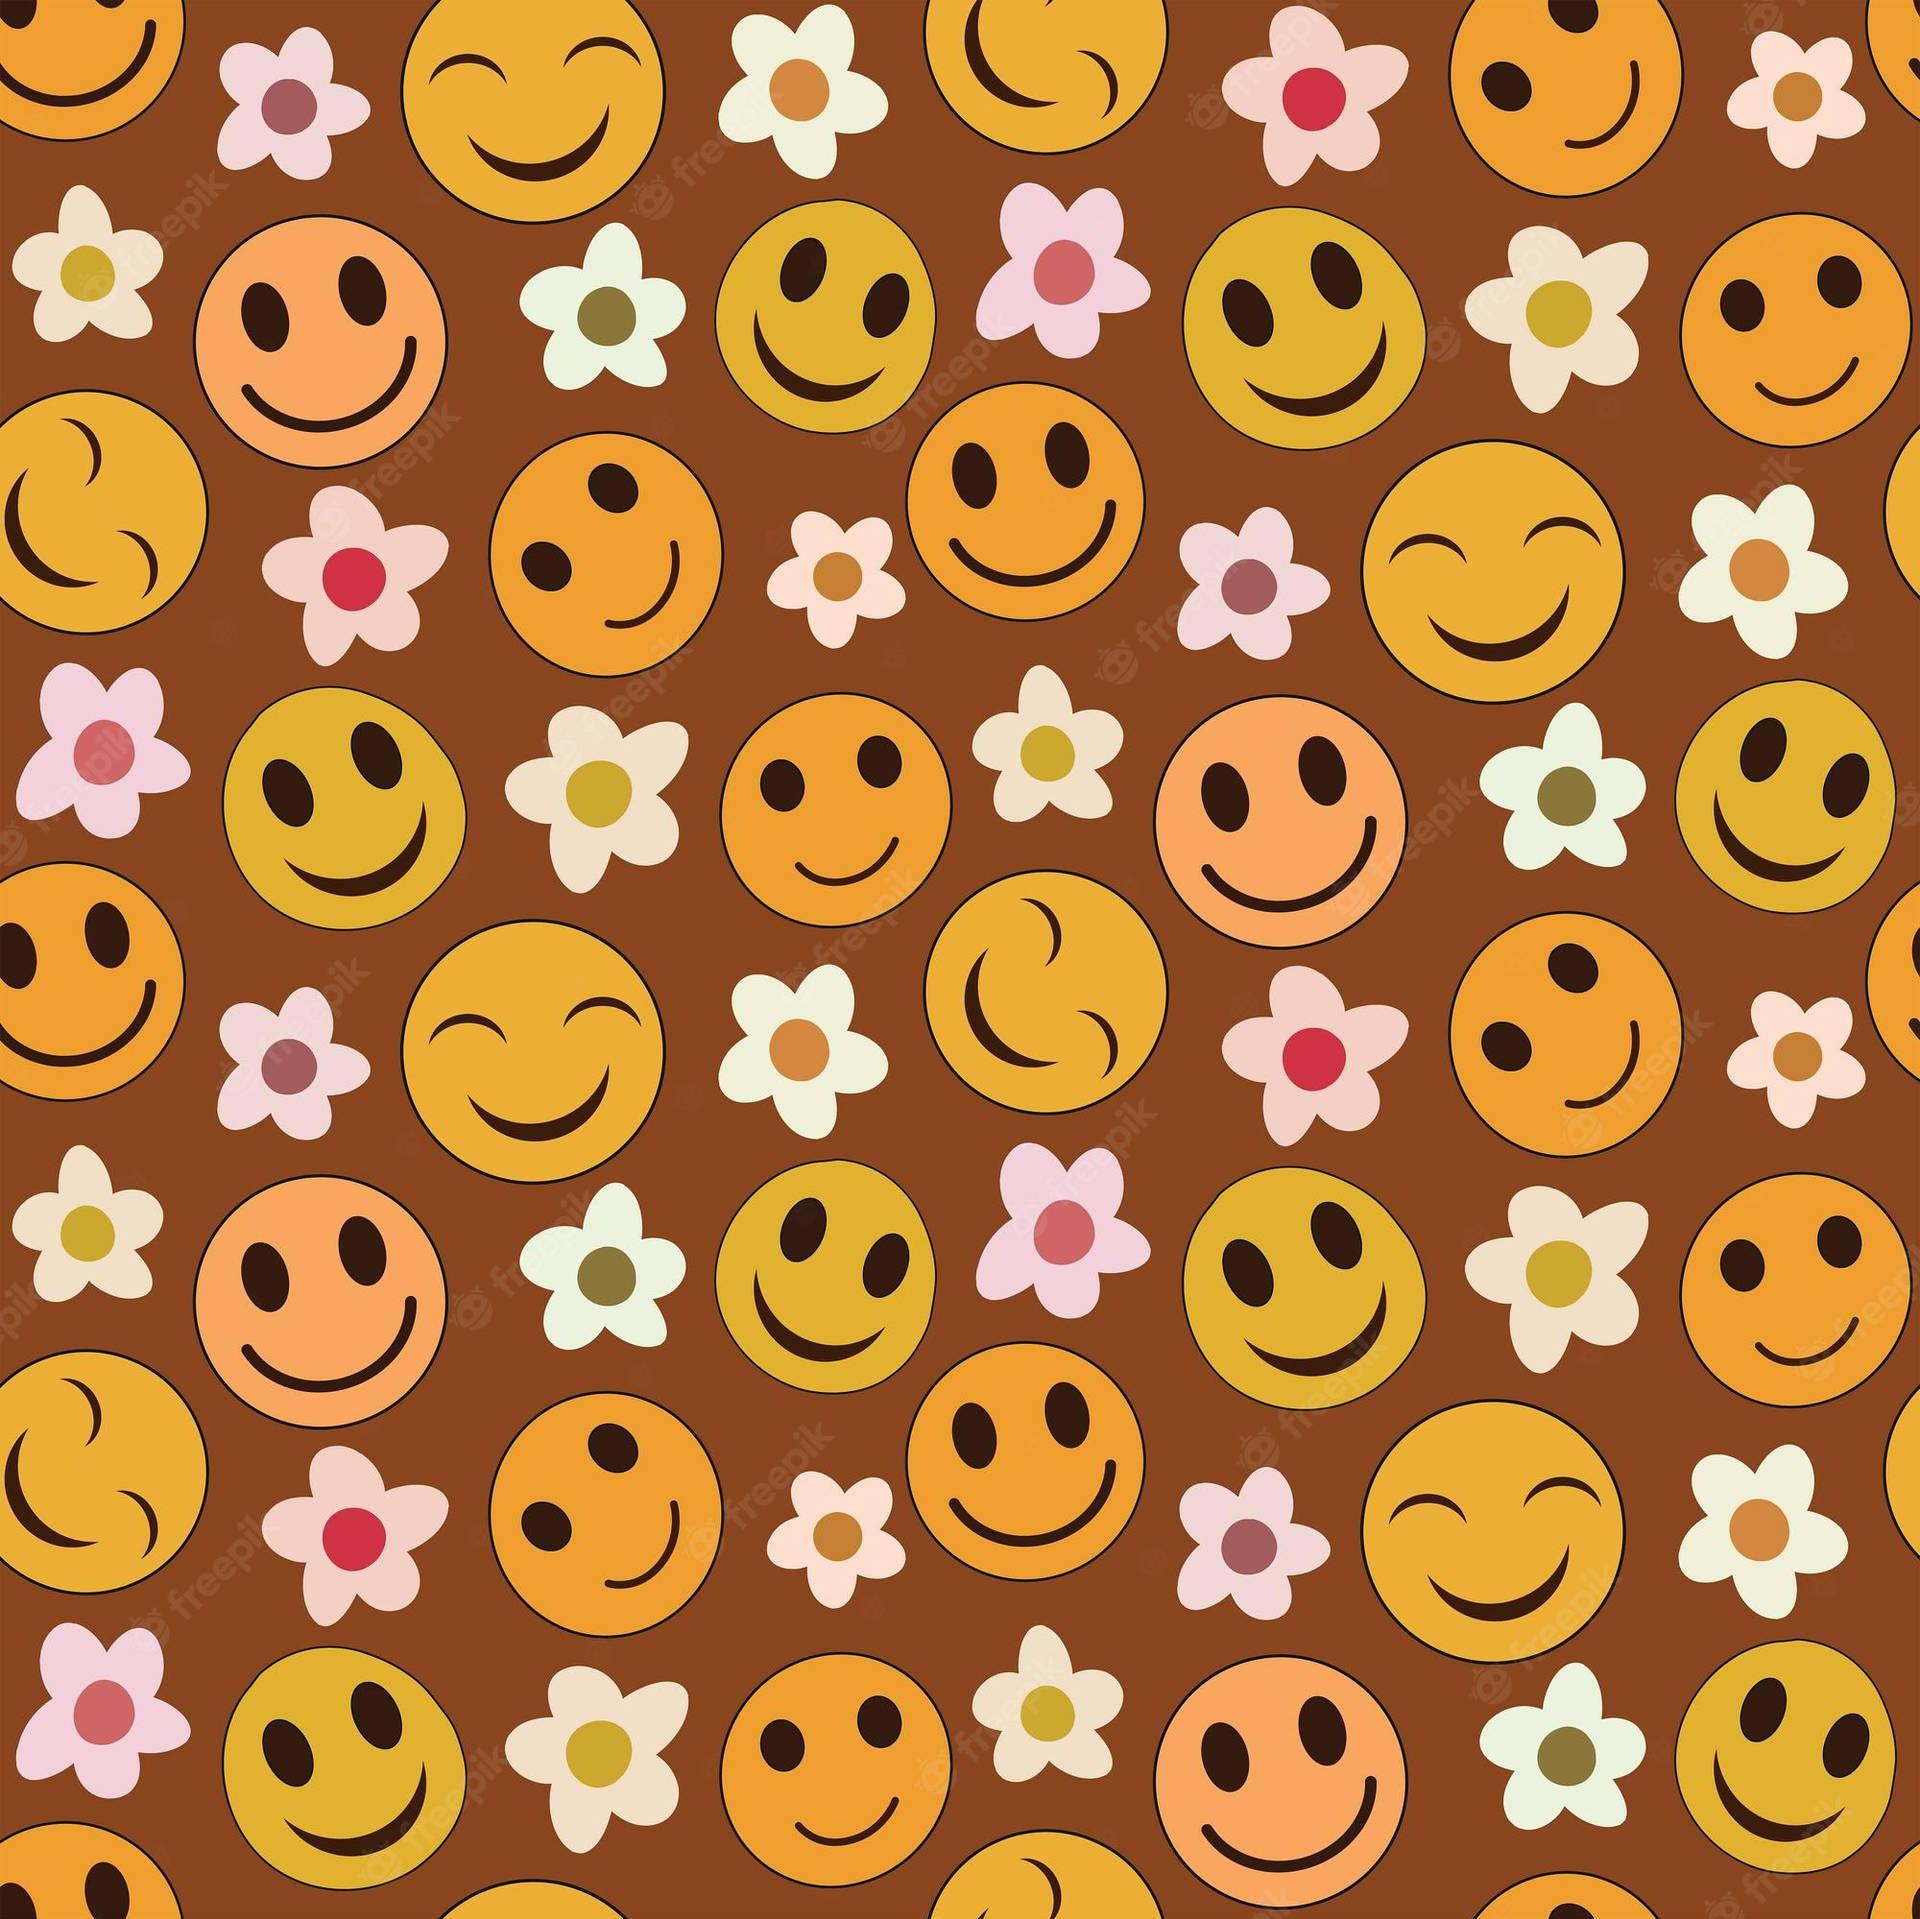 Download Preppy Smiley Face And Flowers Wallpaper